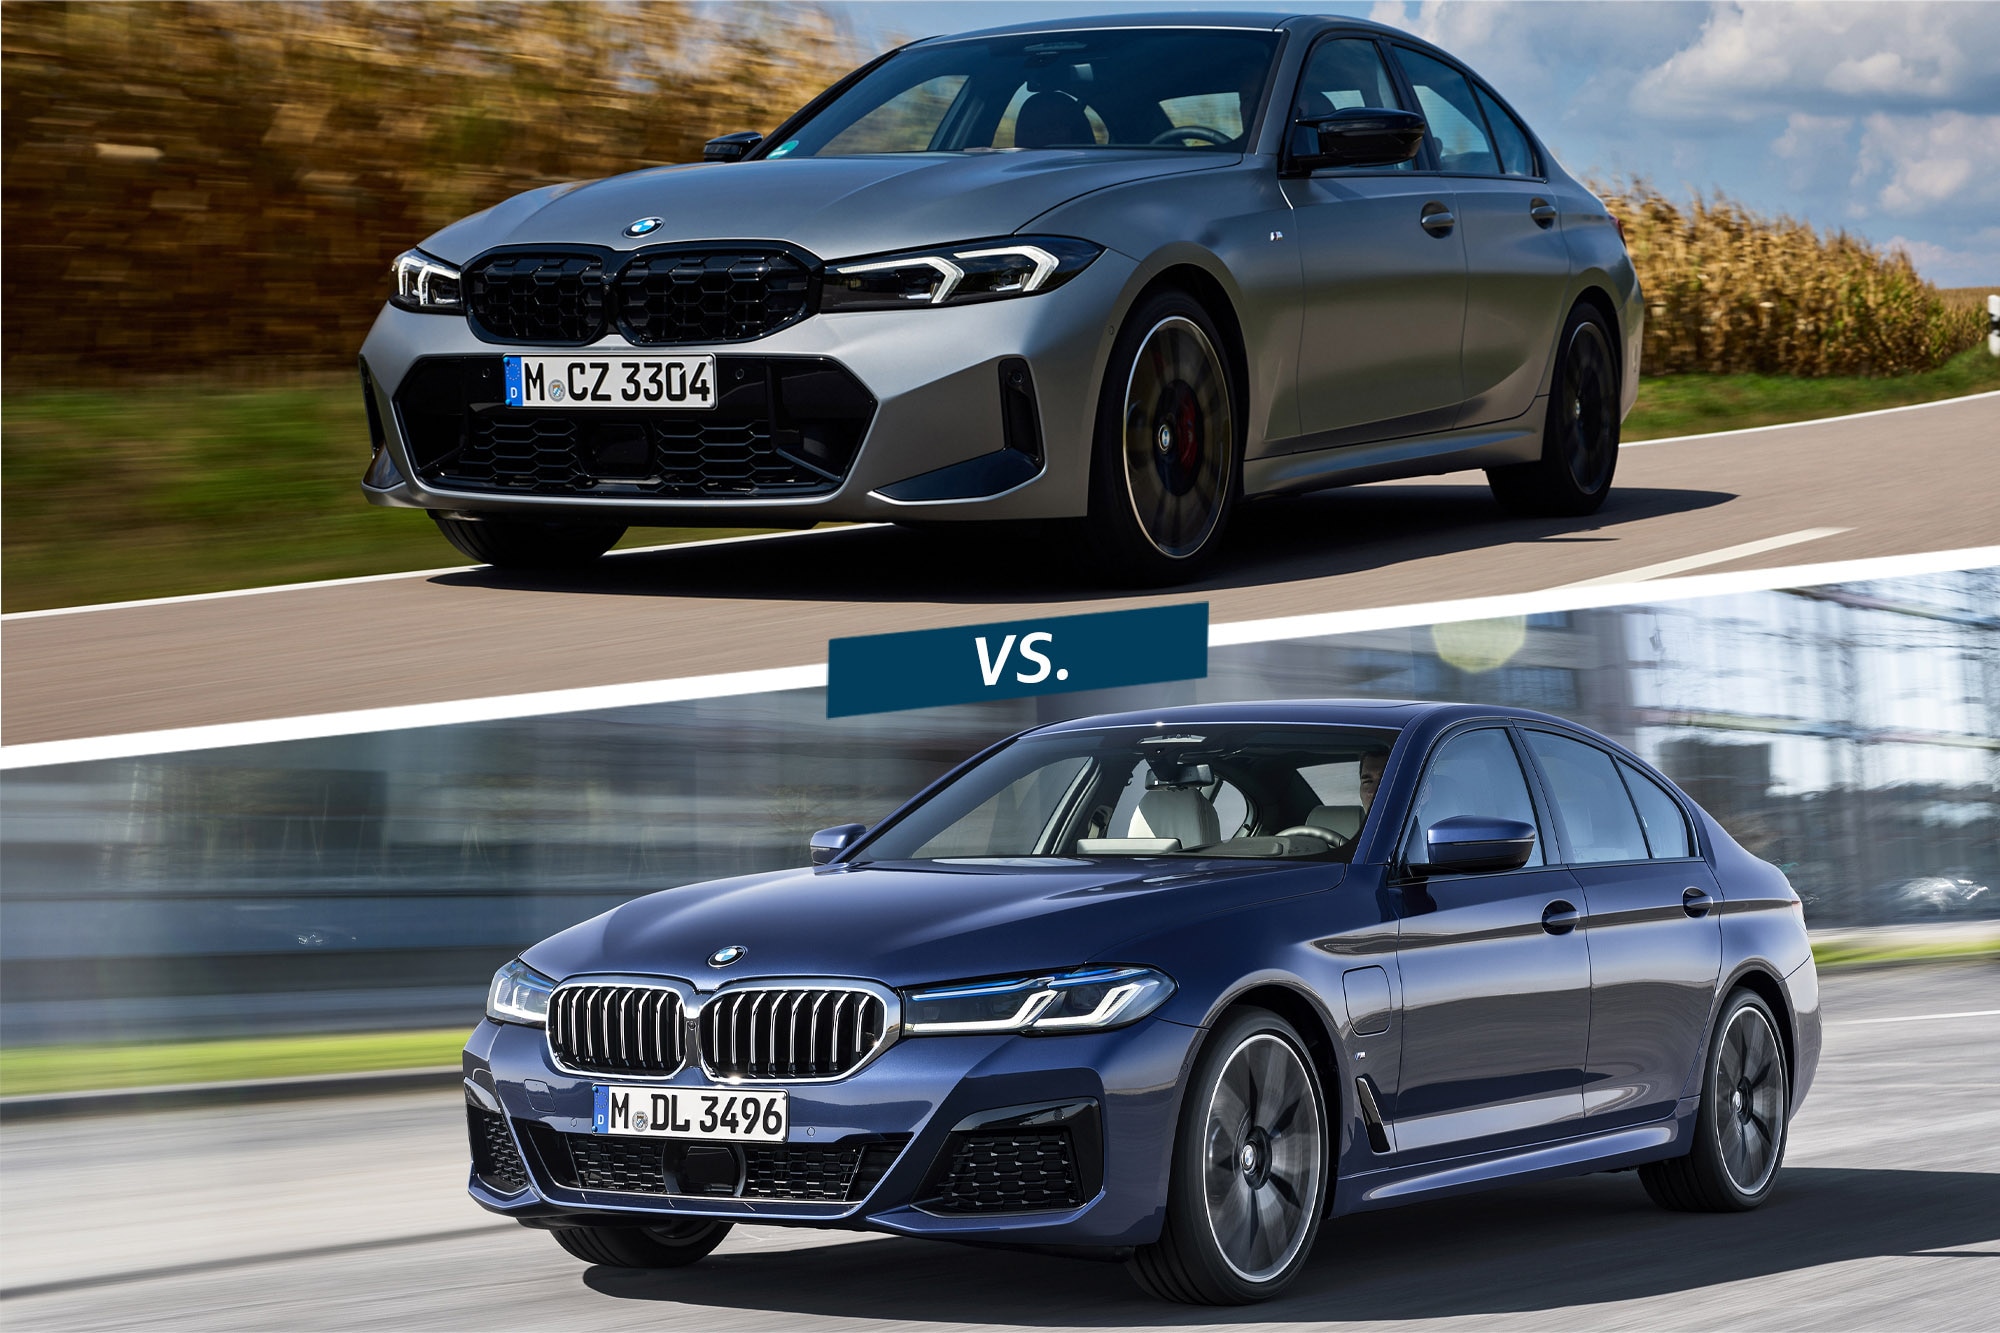 Split image of a 2023 BMW M340i xDrive in gray atop a BMW 5 Series in blue